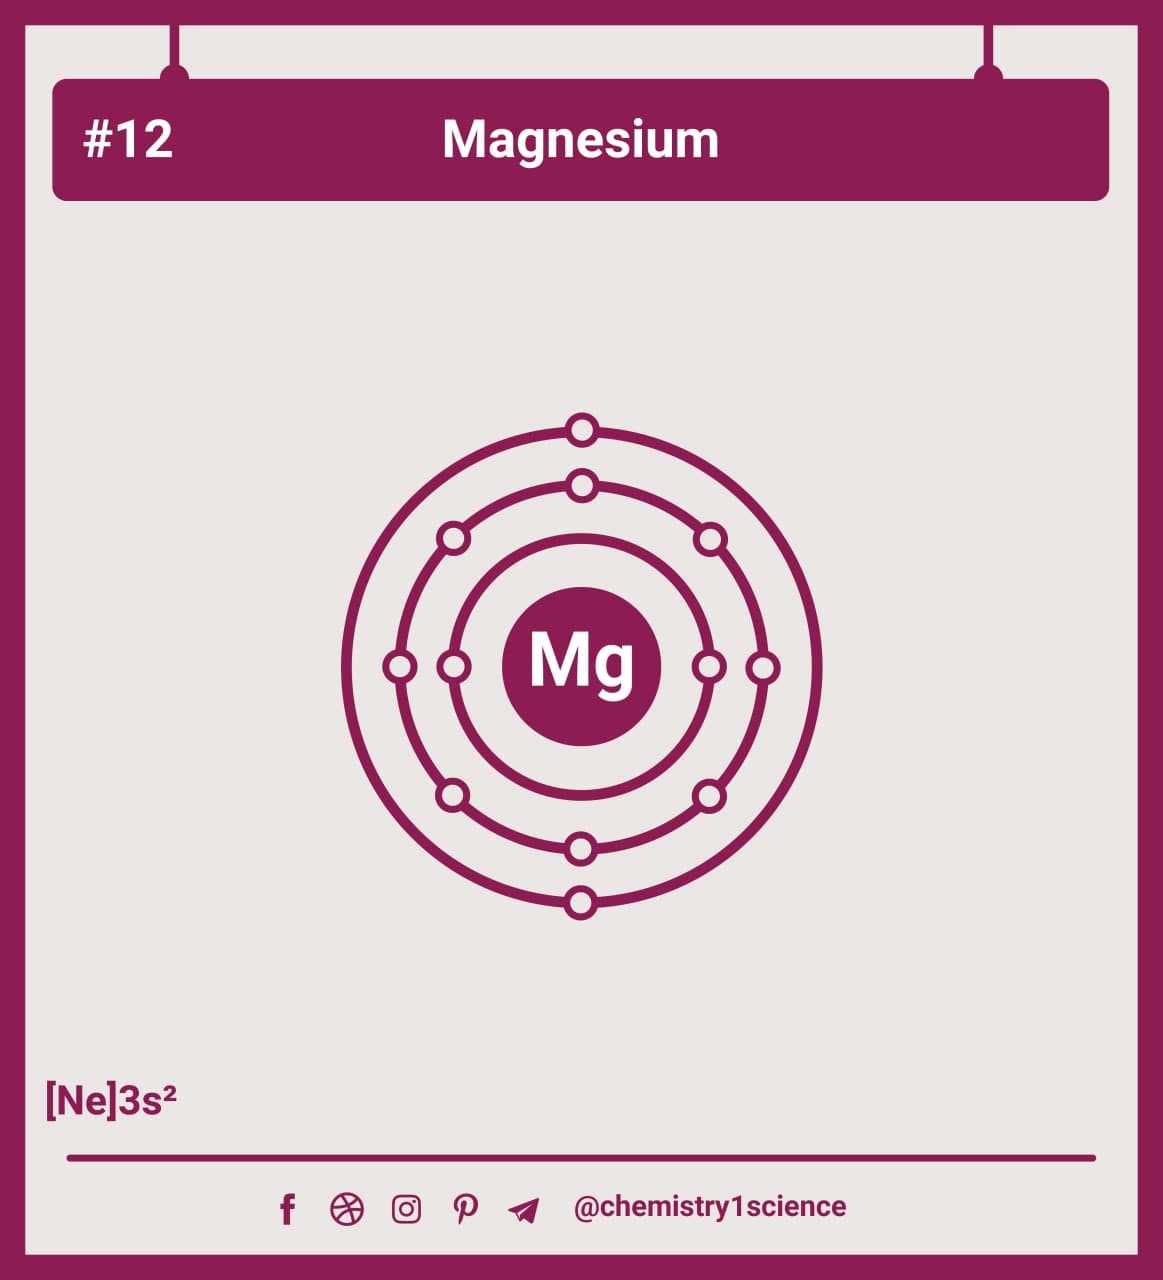 Atom Diagrams Showing Electron Shell Configurations of the Magnesium